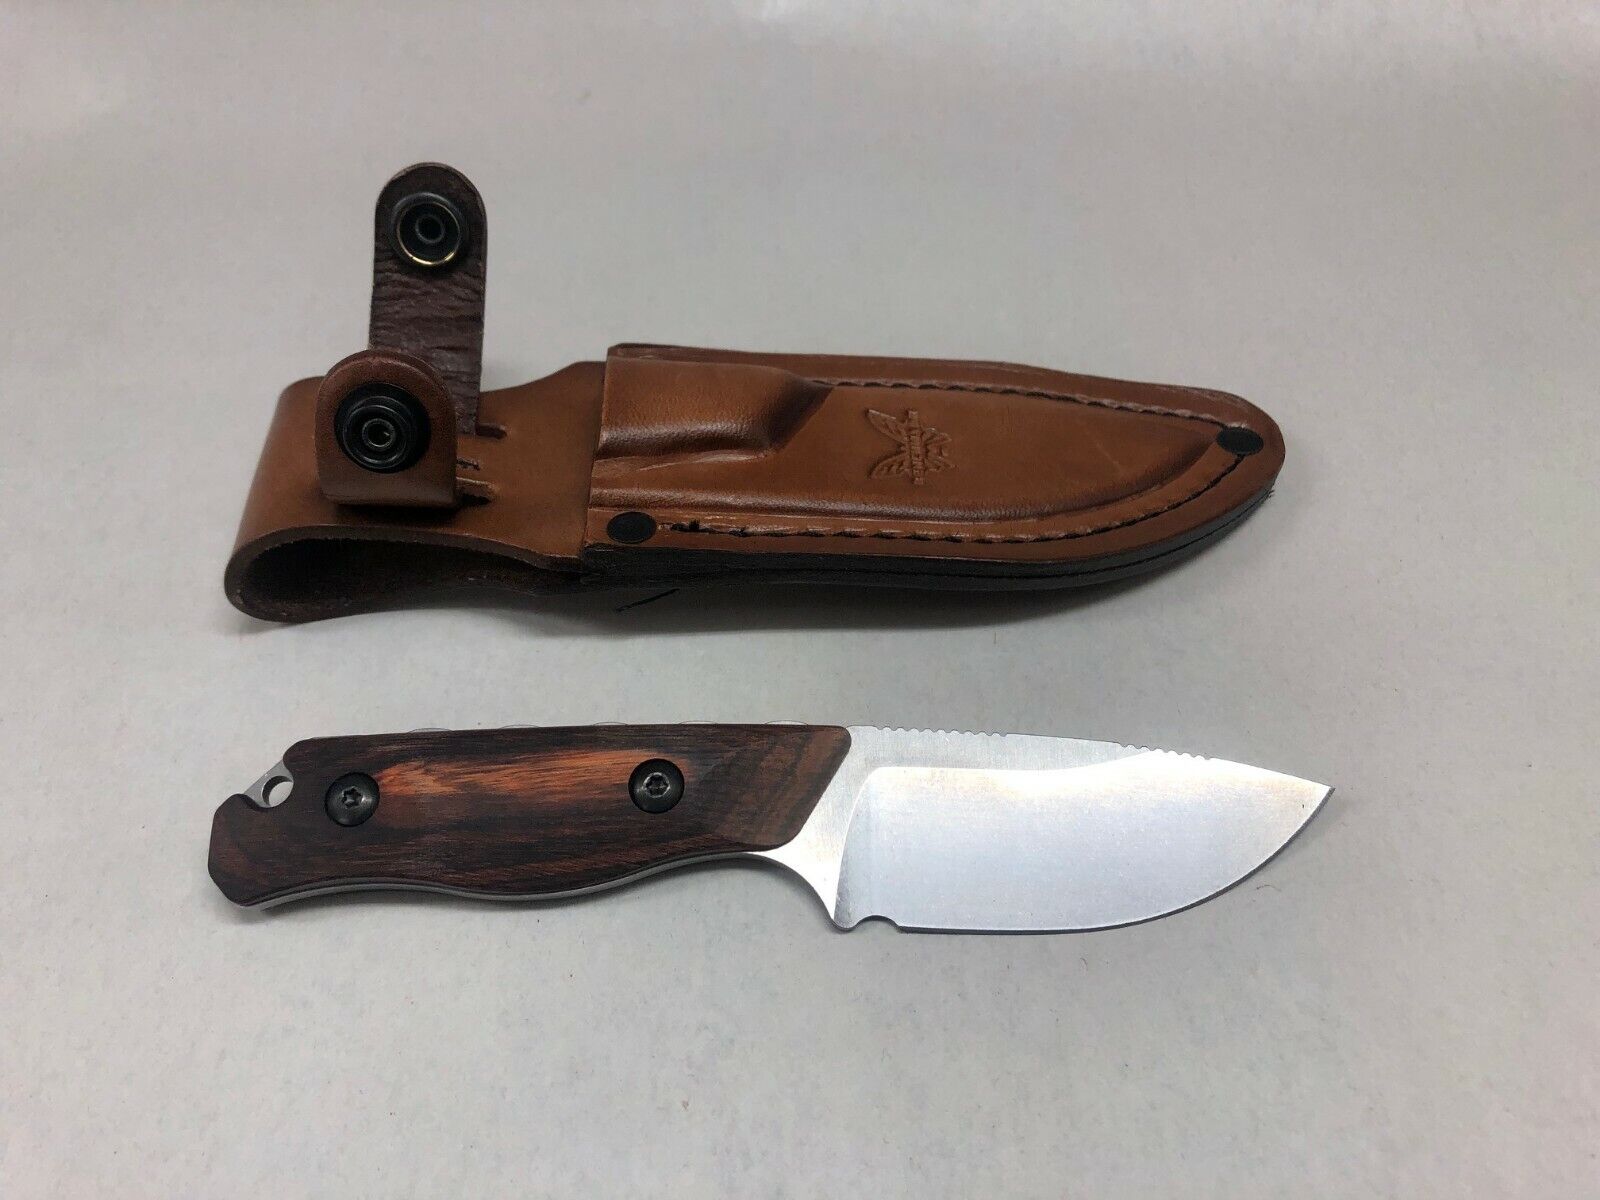 NEW Benchmade 15017 Hidden Canyon Hunter Fixed Blade Hunting Knife CPM-S30V